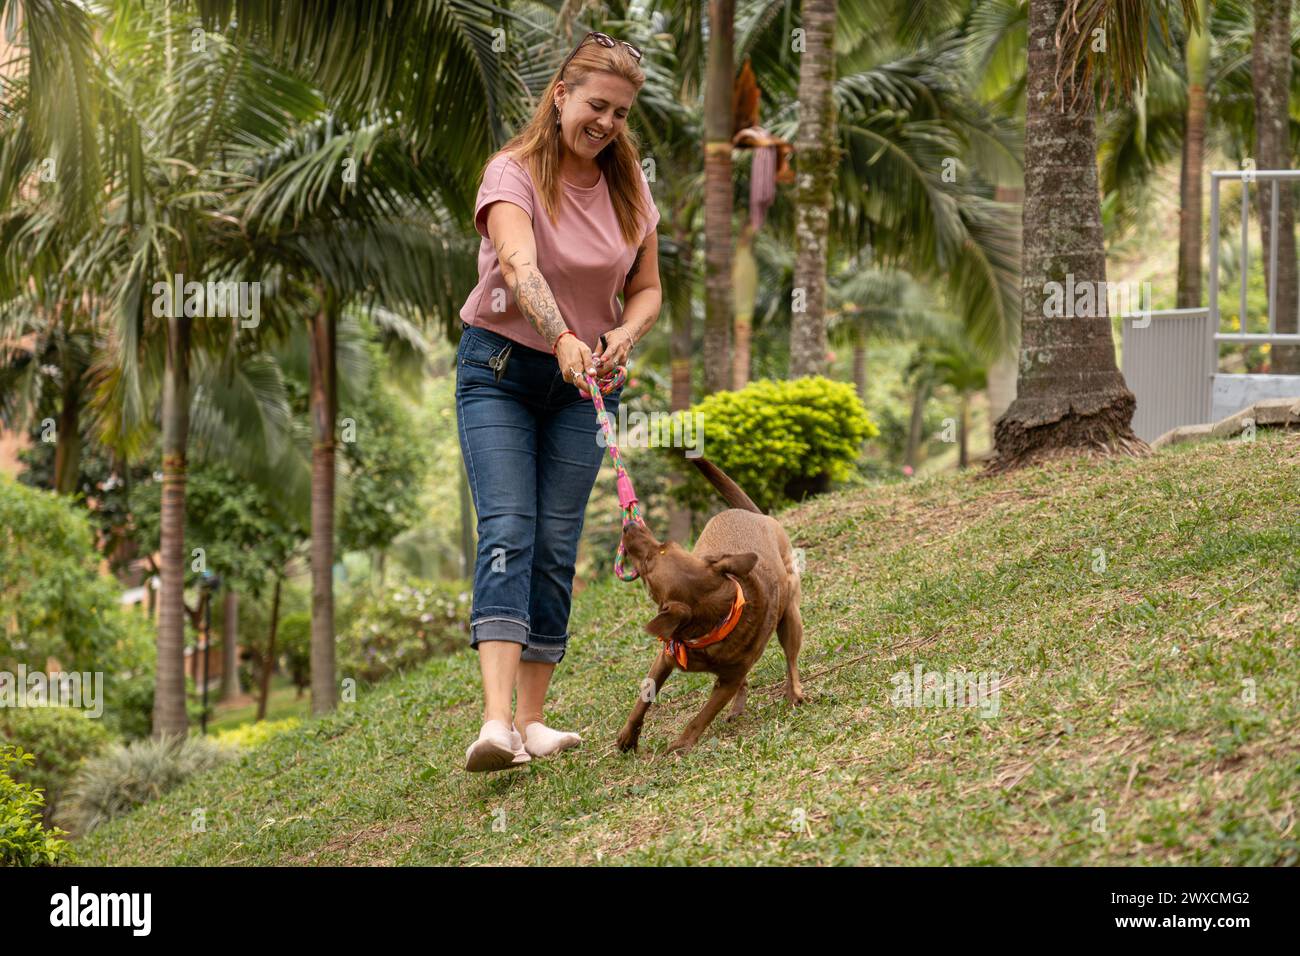 Middle-aged woman smiling and playing with her dog, who is pulling on the leash, in a landscaped area. Stock Photo